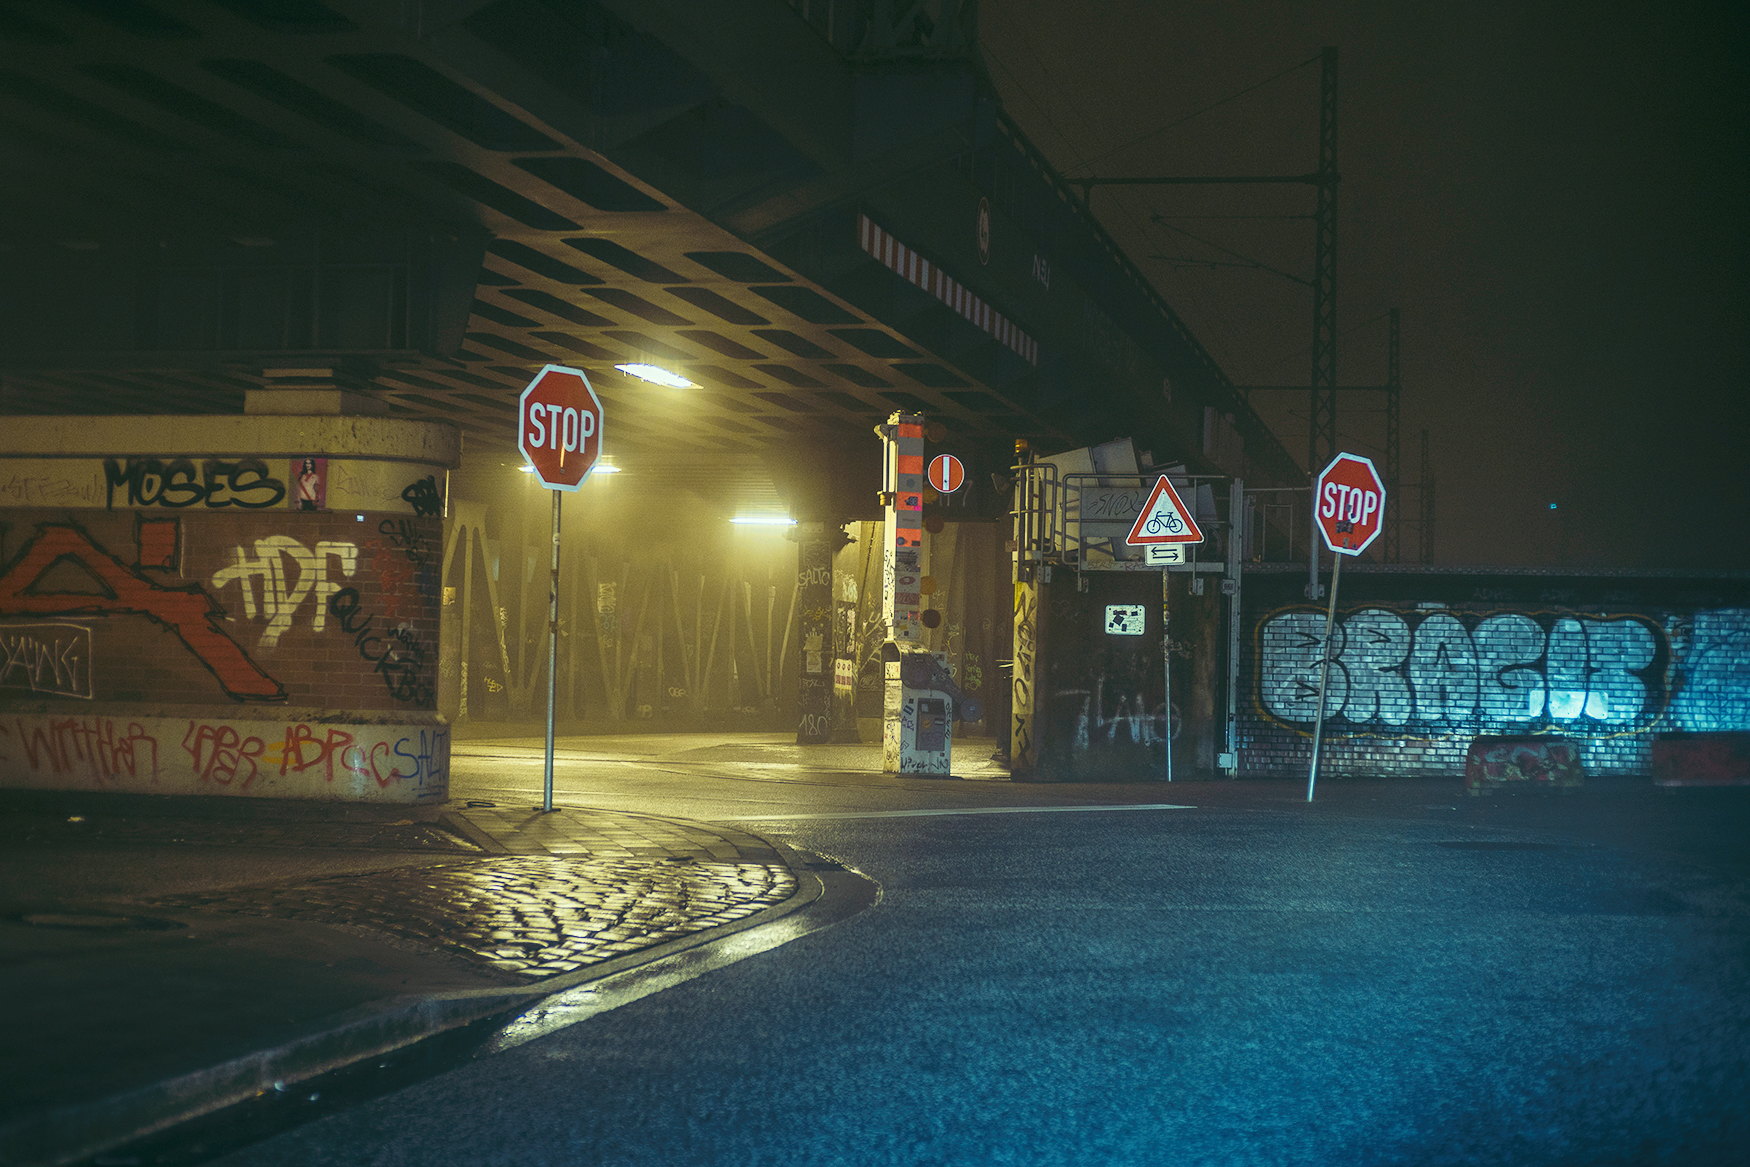 Continuing to explore foggy Hamburg at Night with Mark Broyer